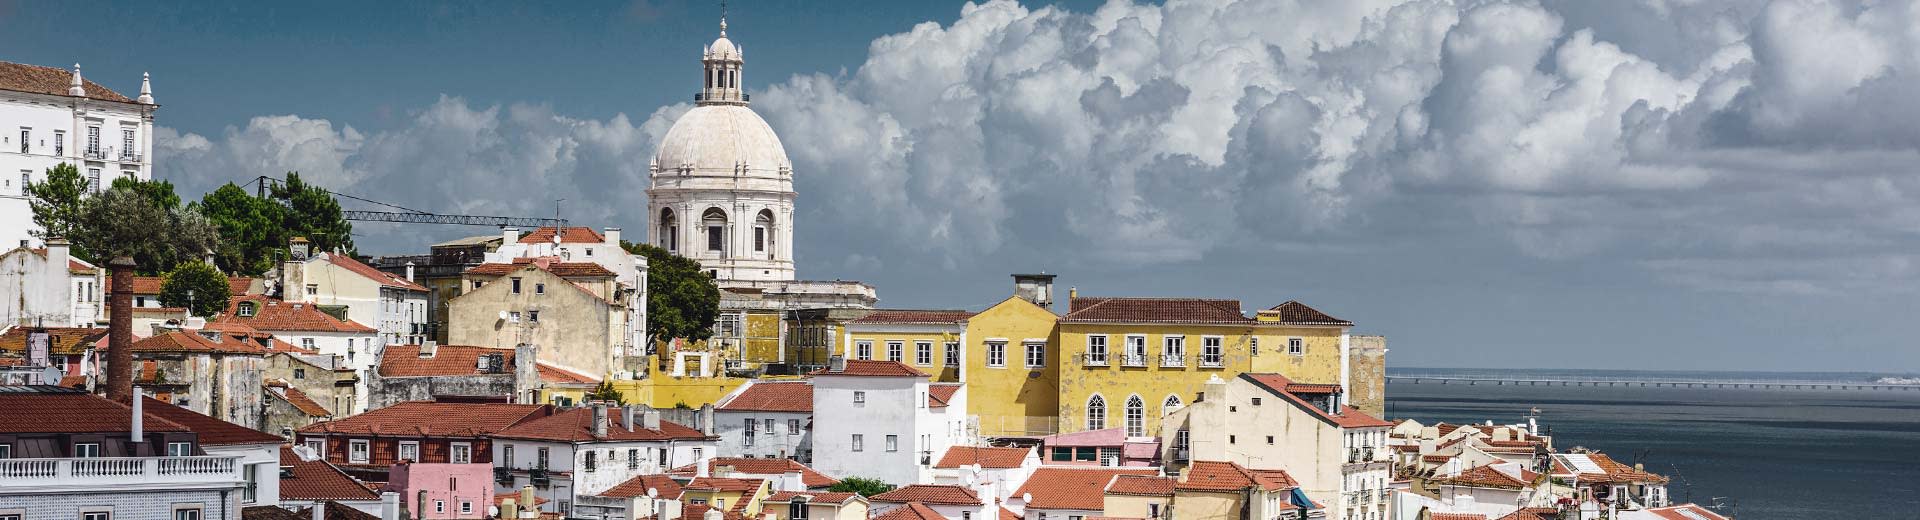 The pastel colored buildigns of Lisbon set against a cloudy sky.